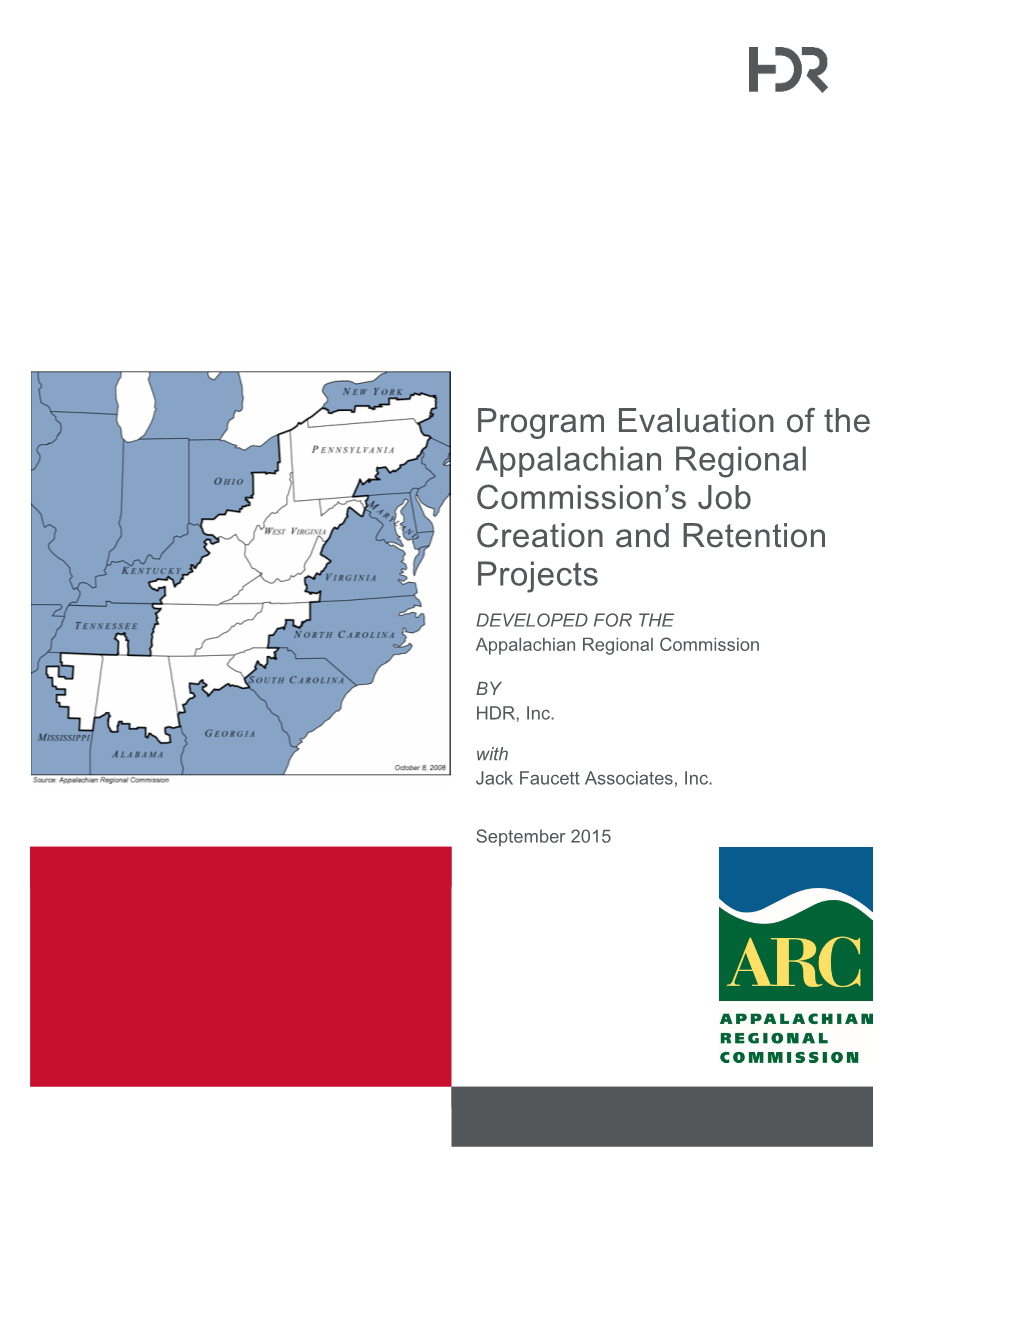 Evaluation of ARC Job Creation and Retention Projects